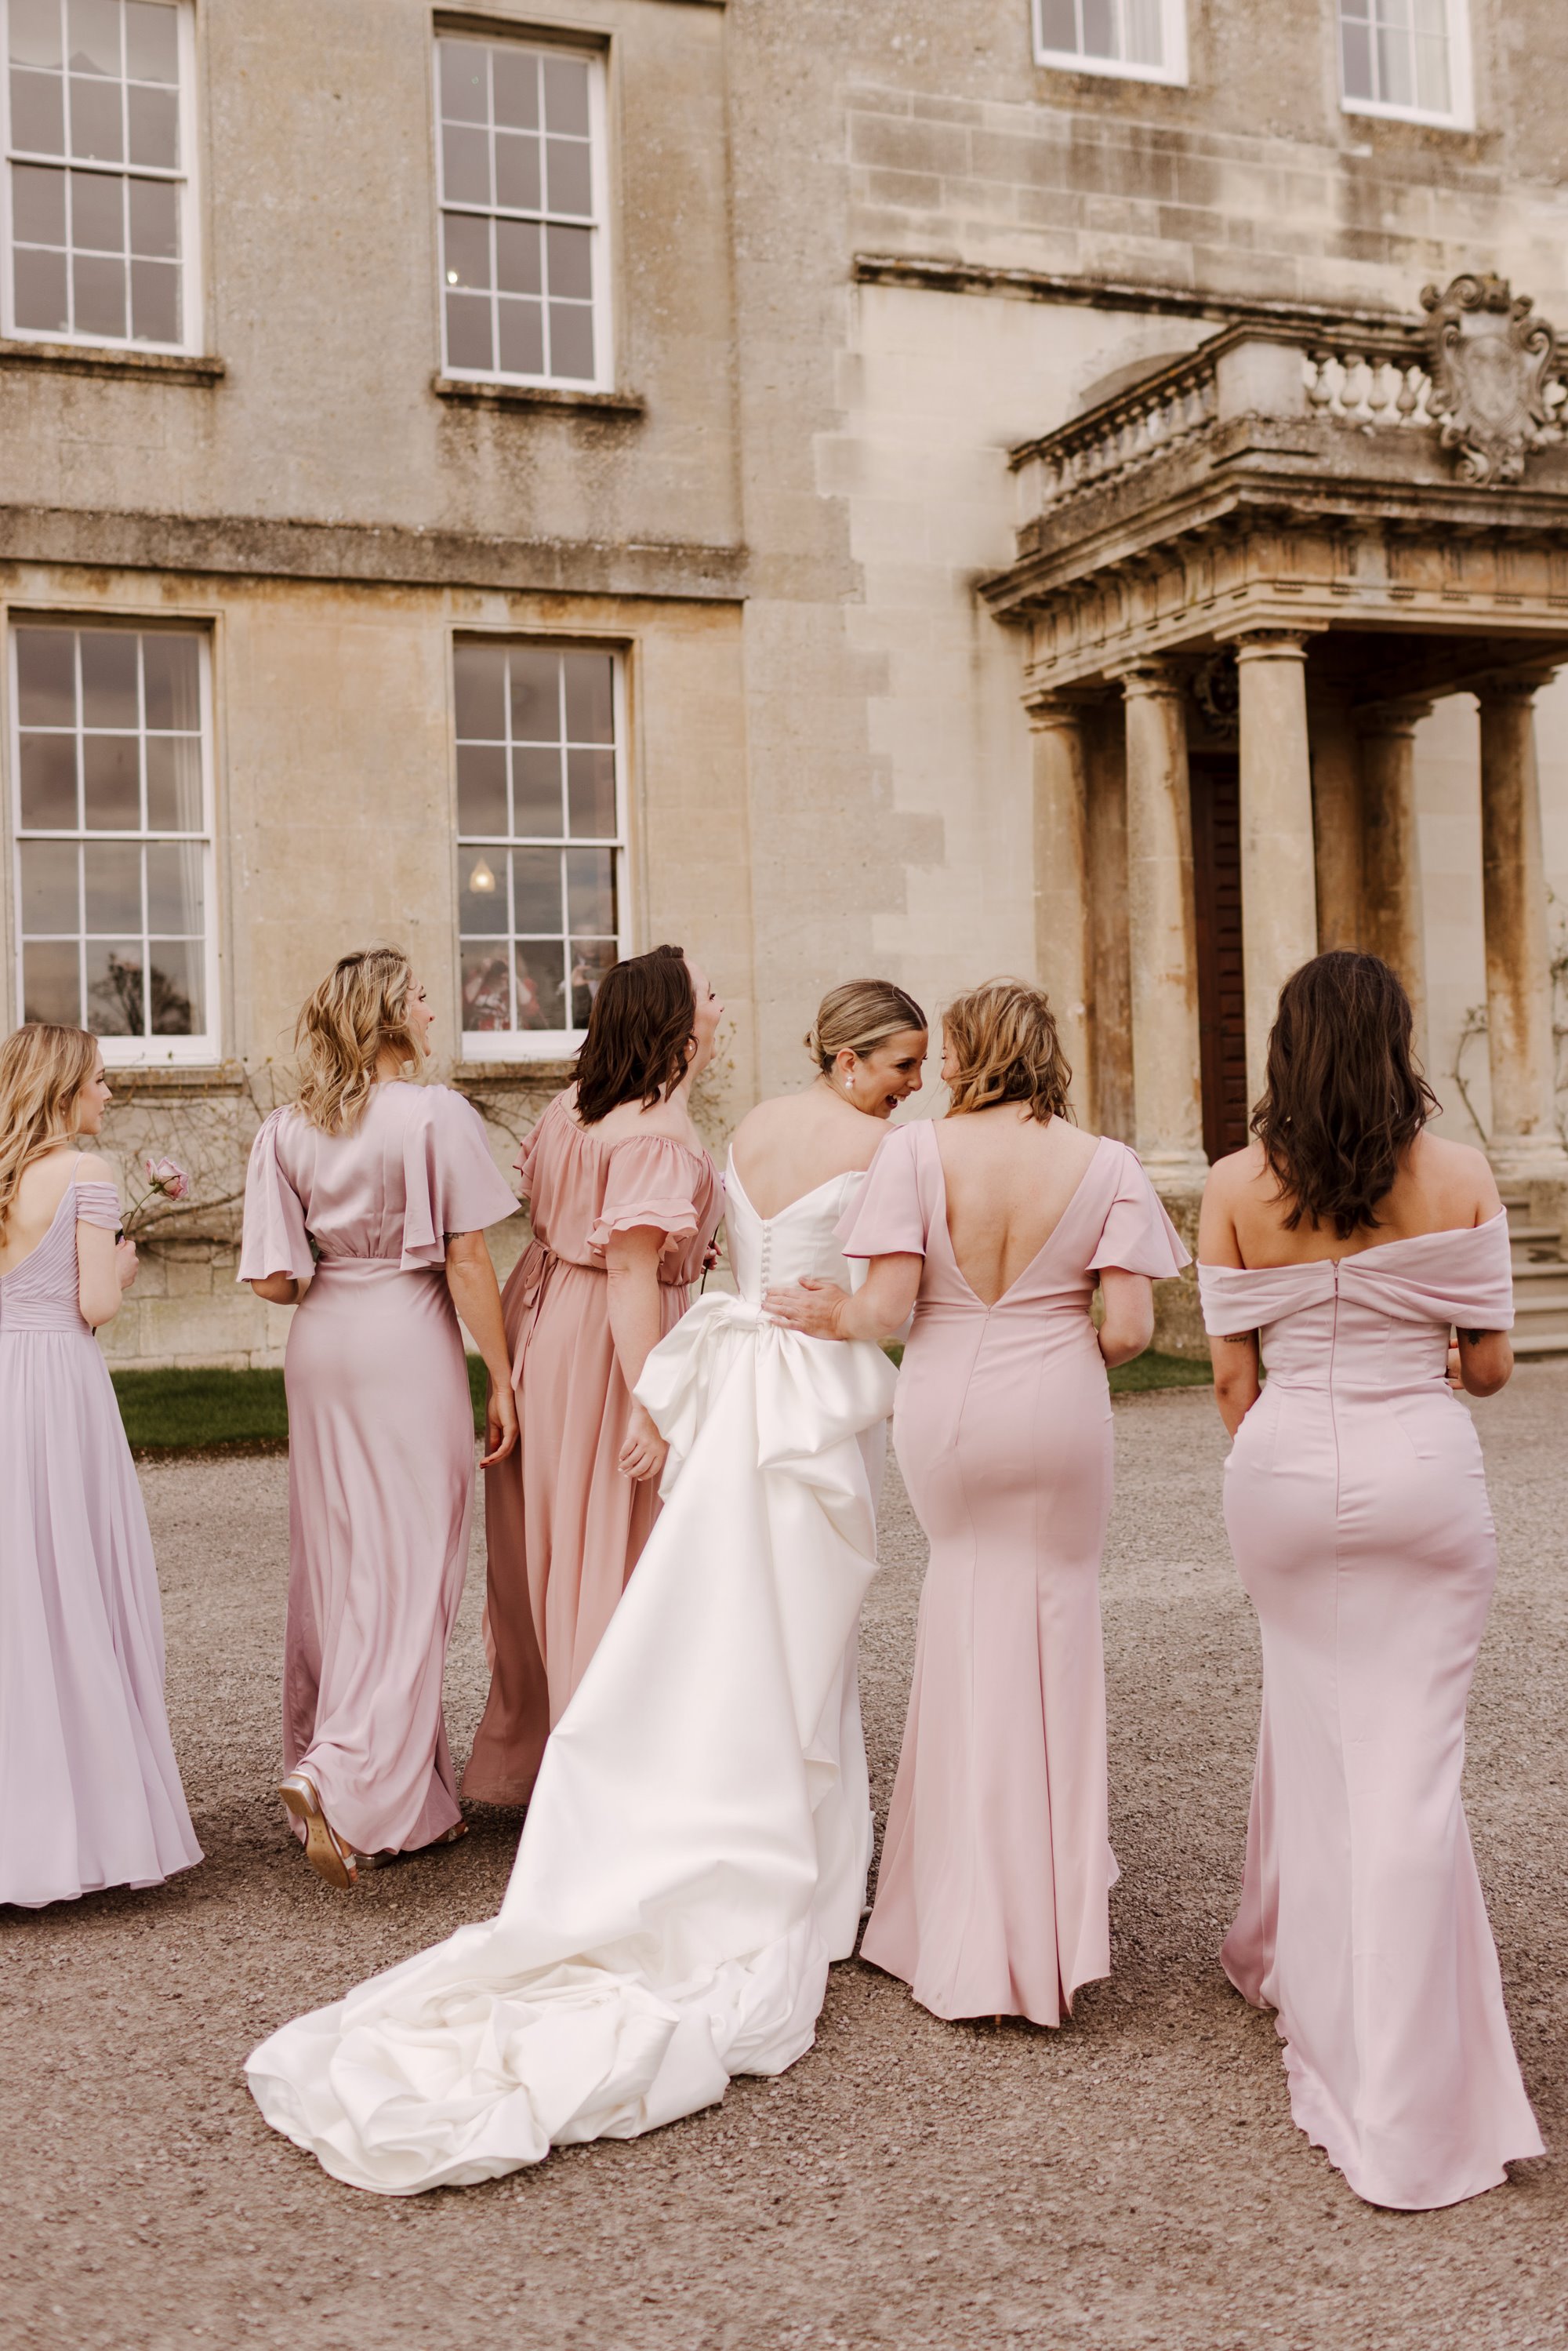 Bride in dress with huge bow and bridesmaids in pink dresses figure hugging with backs to the camera in front of stately home wedding venue